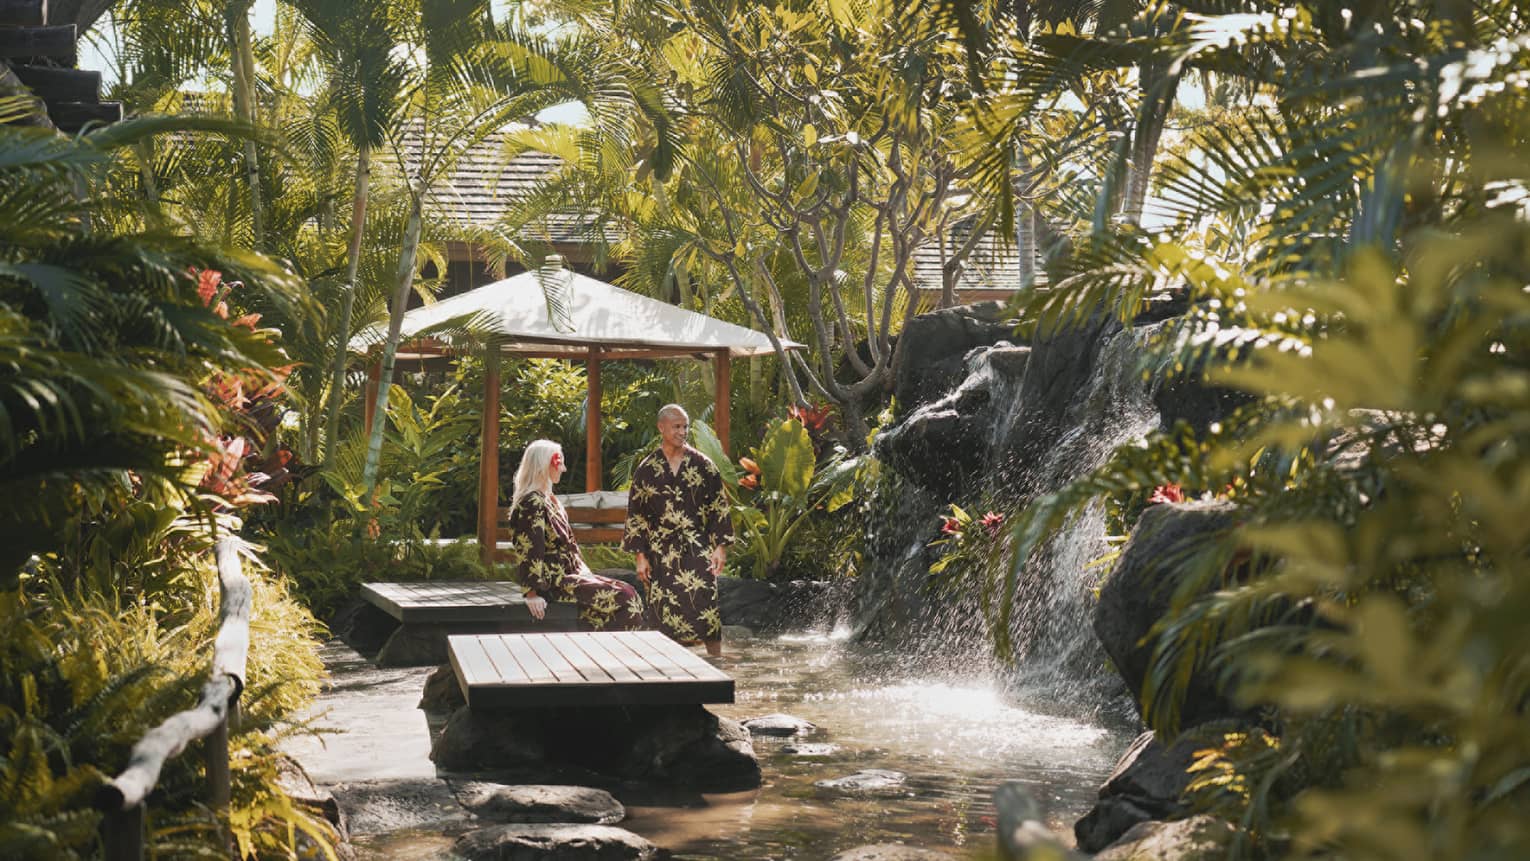 Two four seasons guests lounge in robes at the lush, vegetation-surrounded outdoor spa